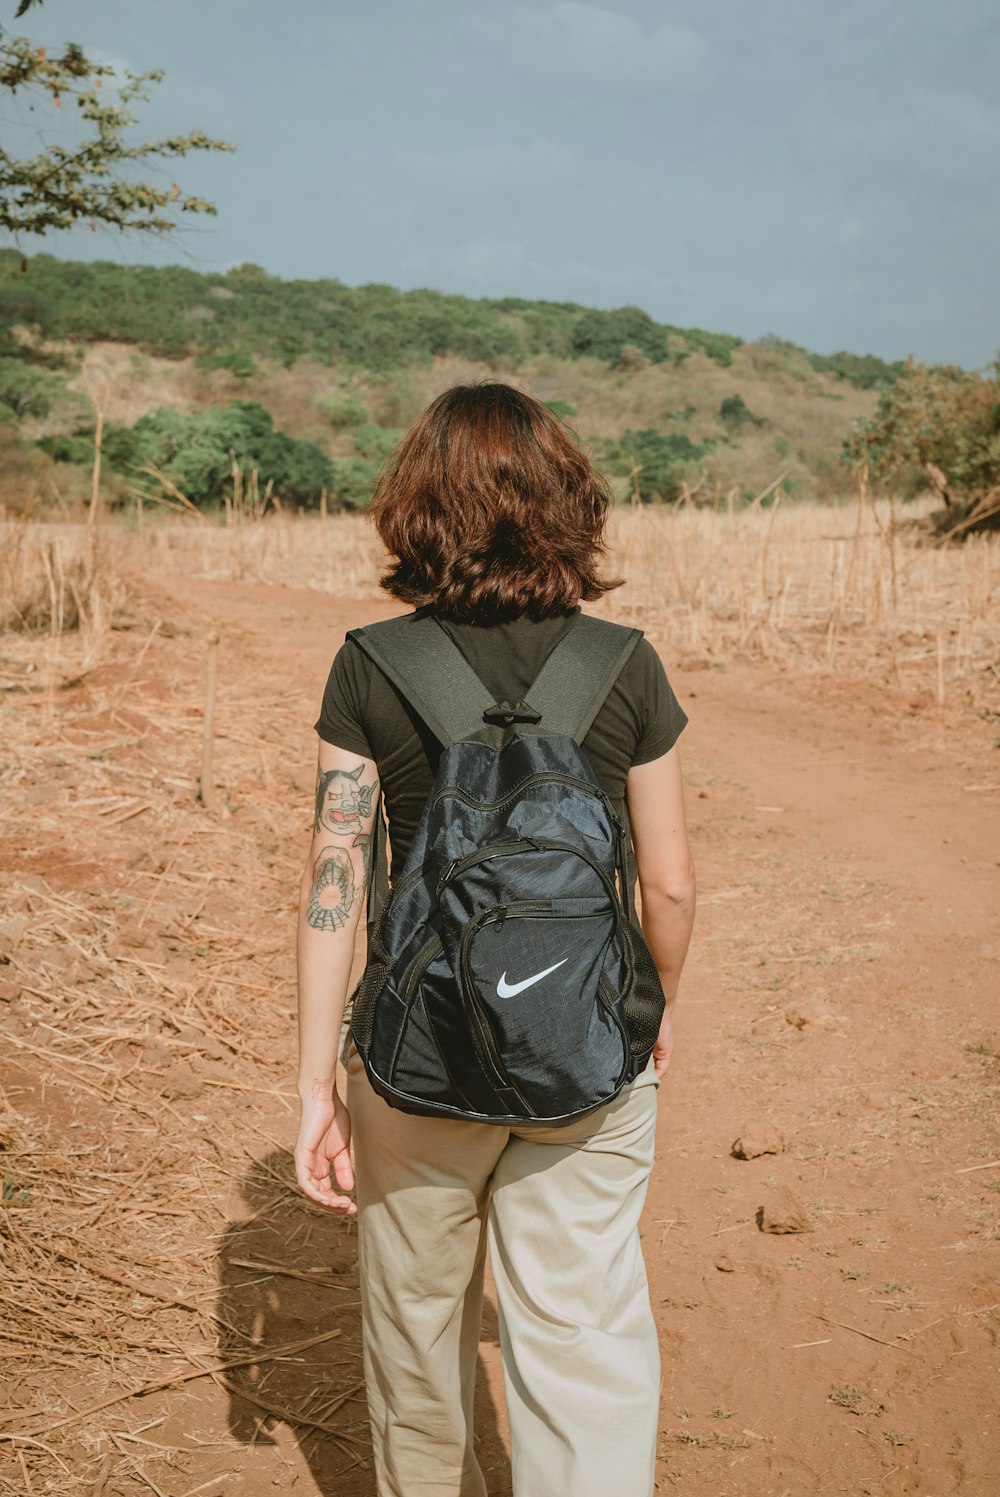 a person with a backpack walking on a dirt road